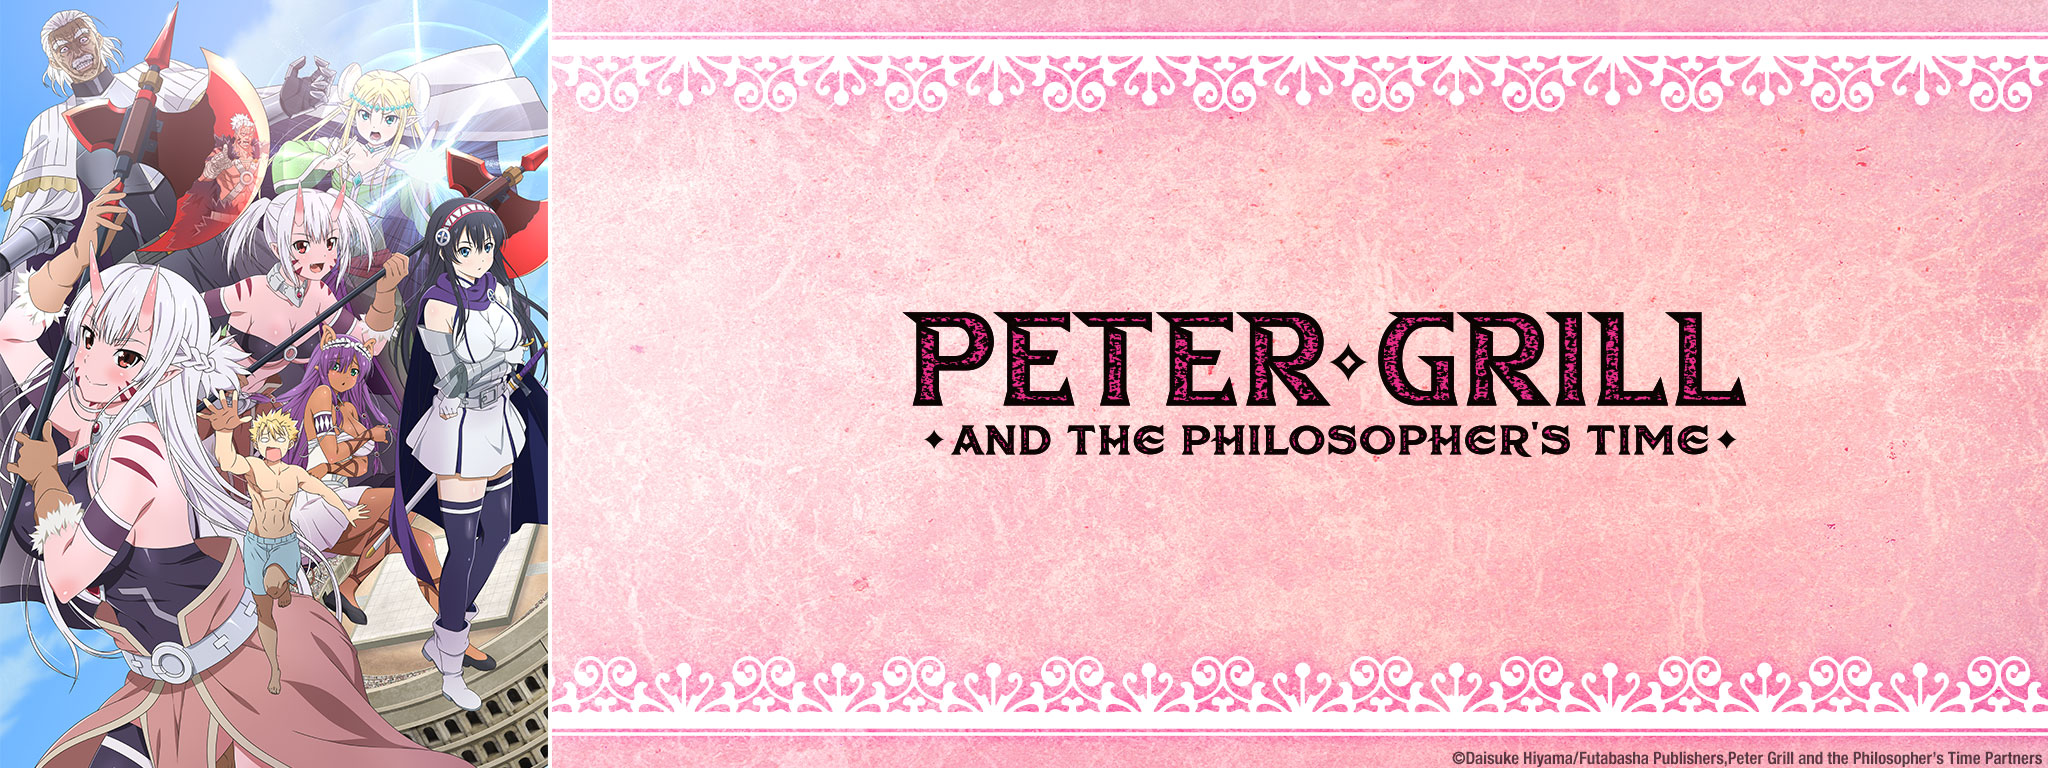  Peter Grill And The Philosopher's Time : Atsumi, T